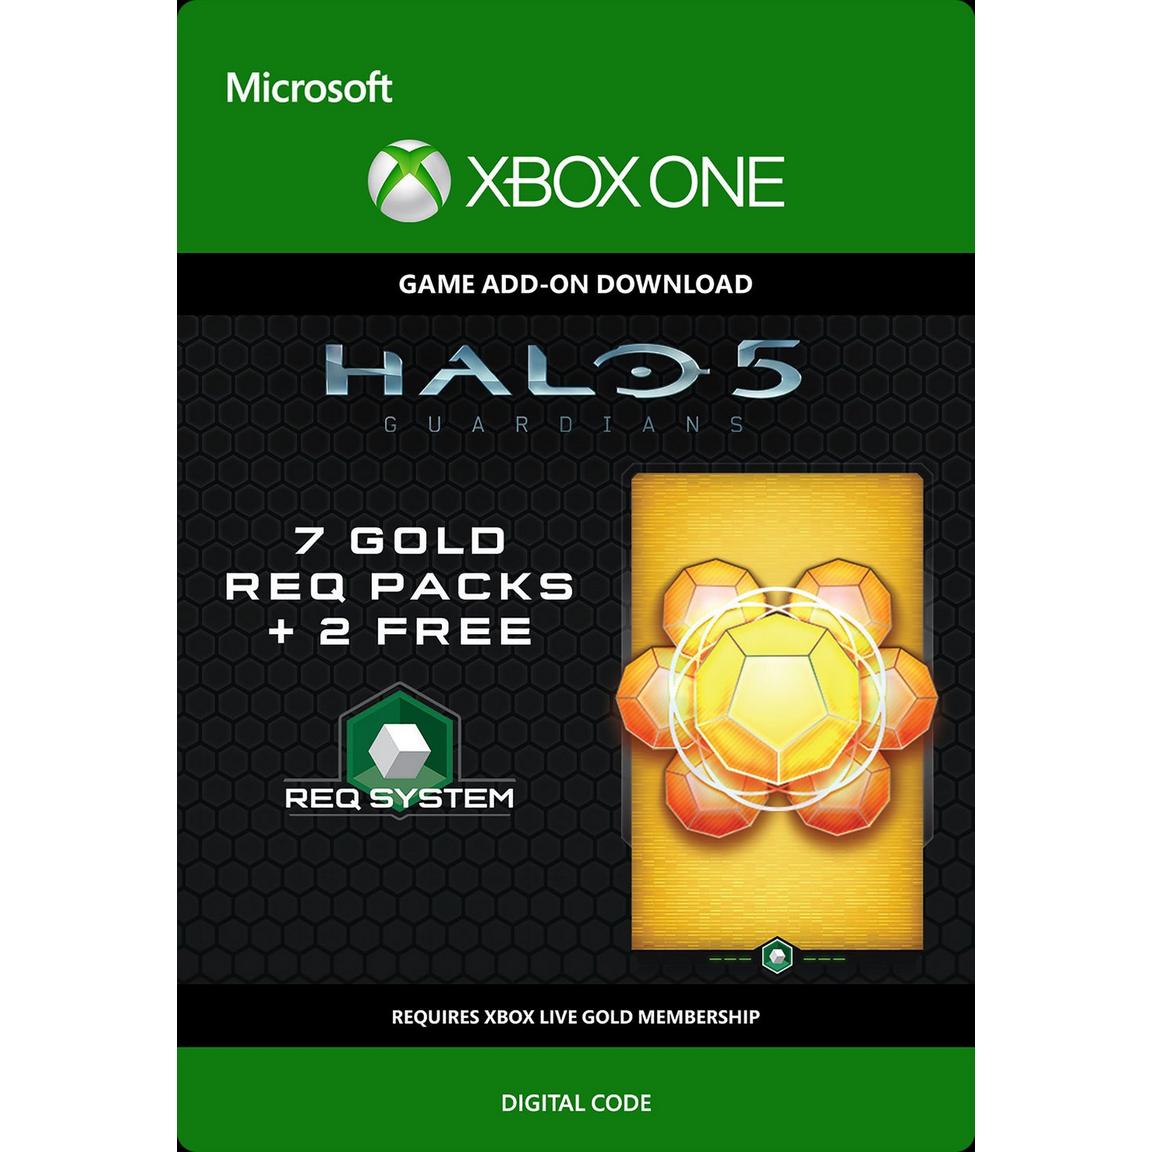 Microsoft Halo 5: Guardians 7 Gold Req Packs DLC and 2 Free - Xbox One -  7LM-00003